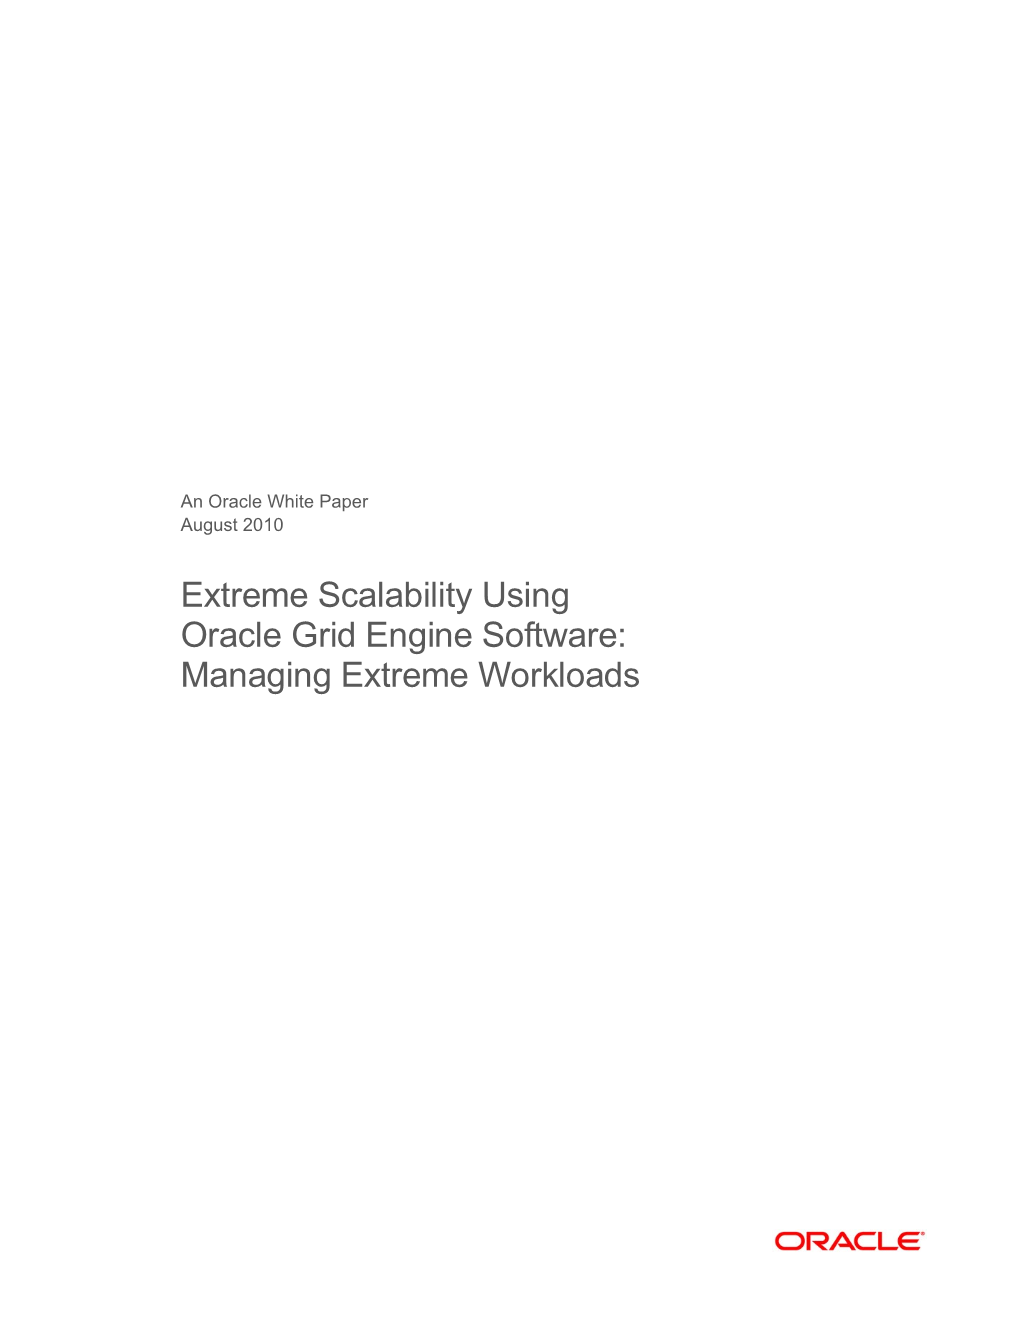 Oracle White Paper August 2010